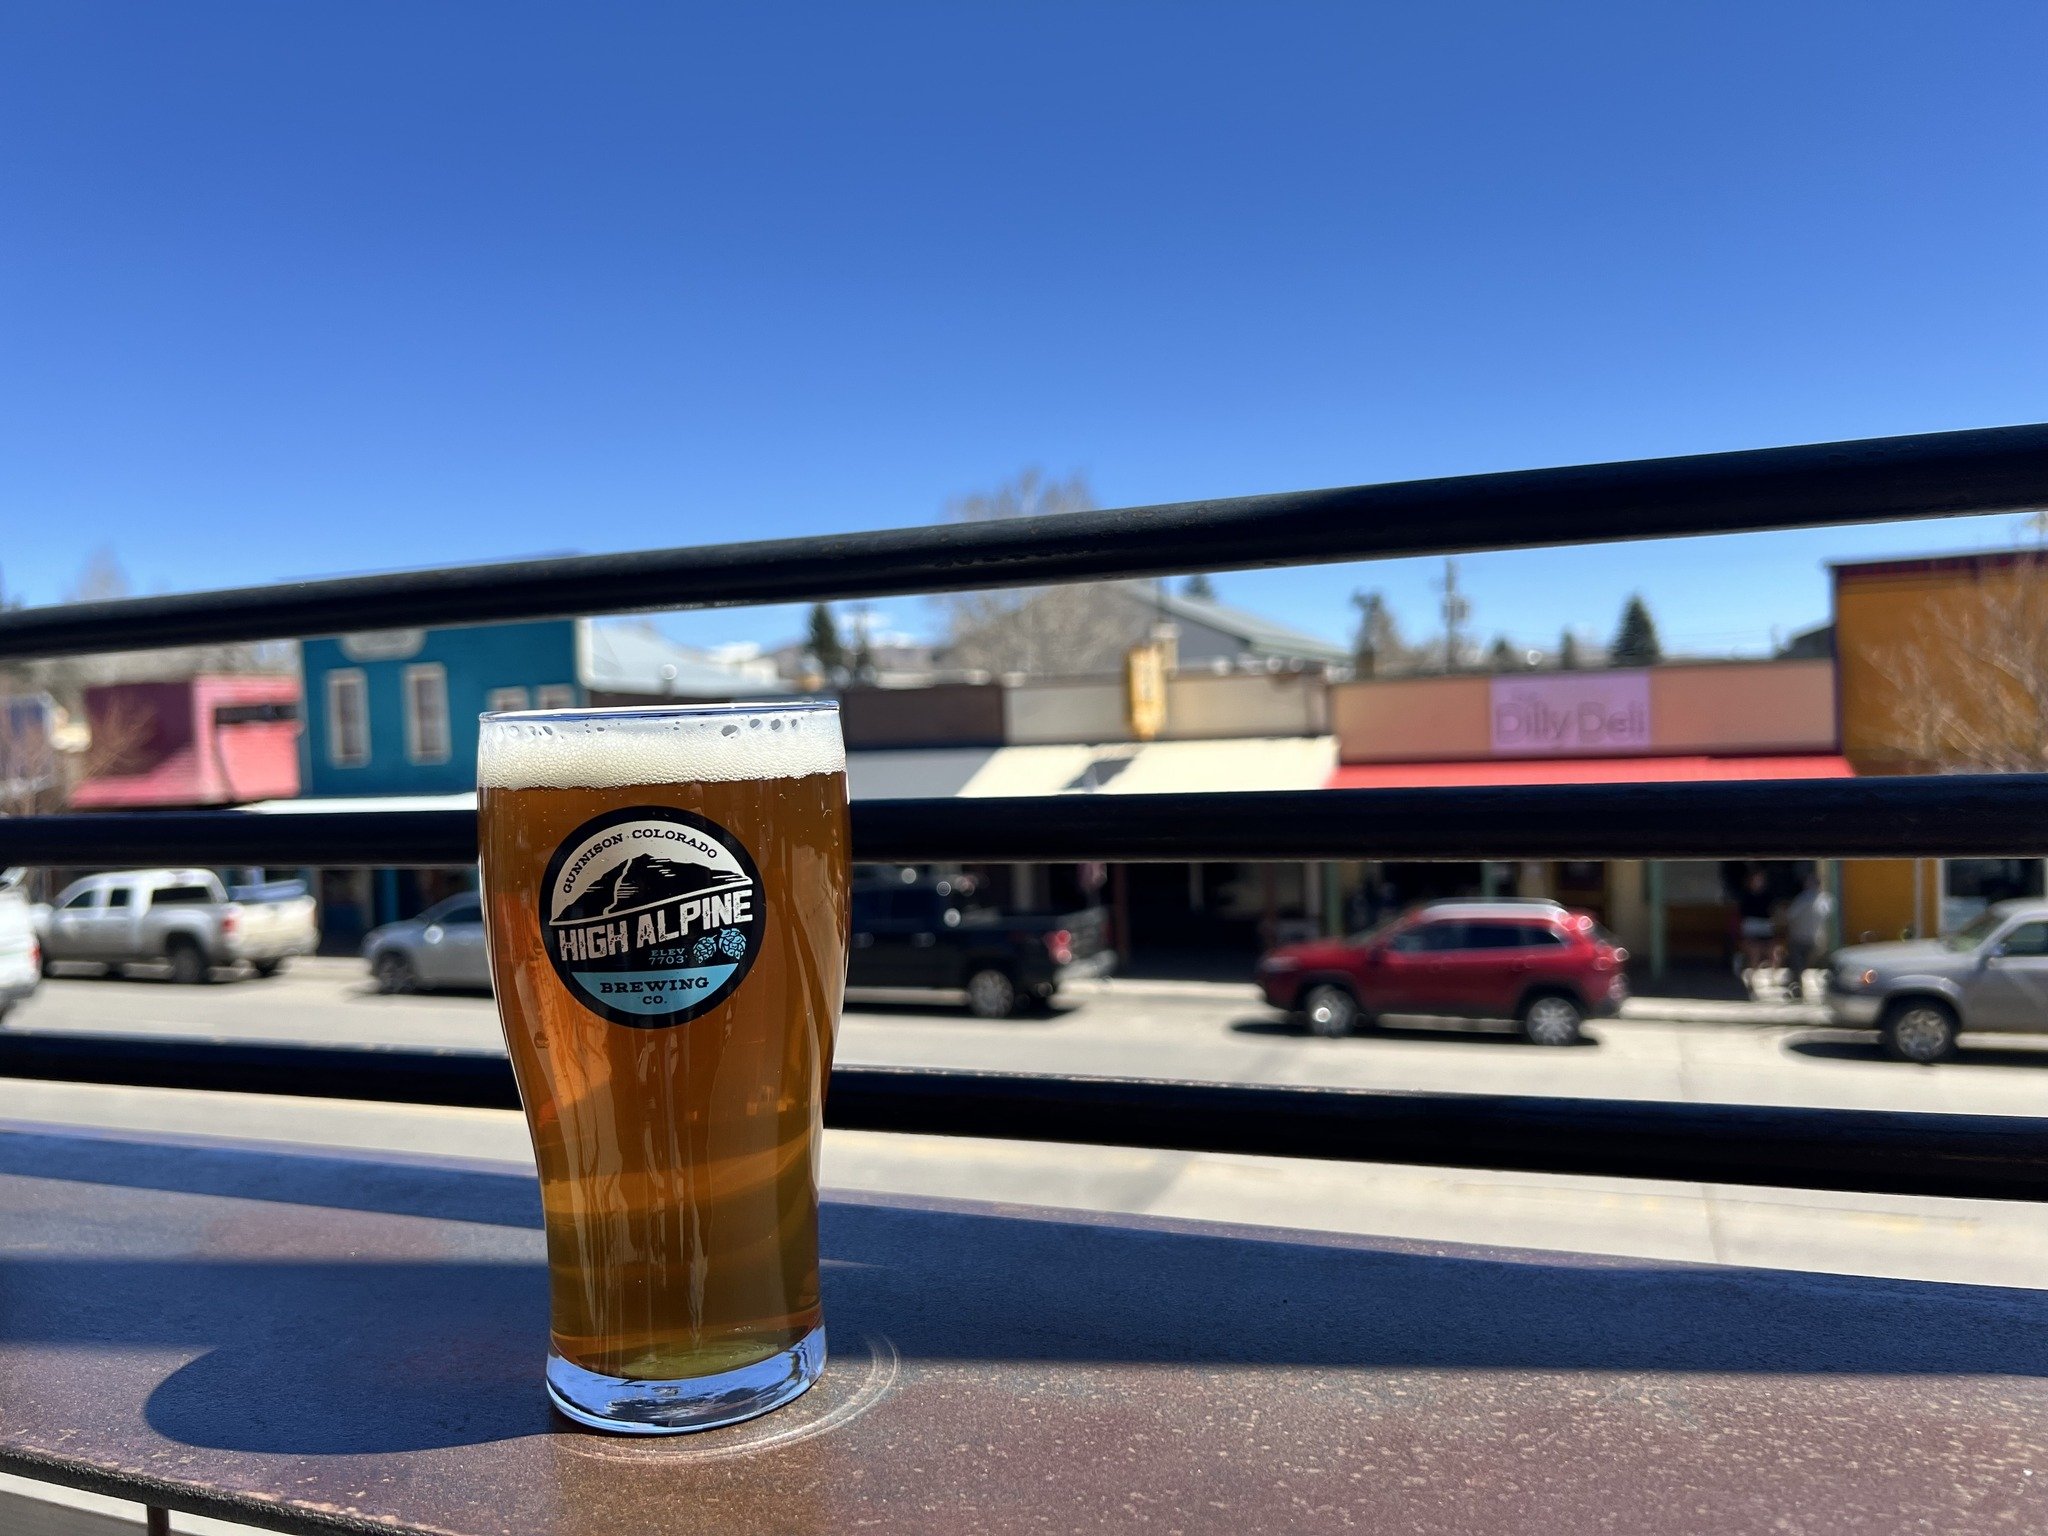 And just like that, deck season is in full swing!  Stop by this weekend for sun and beer!  We just put a fresh batch of Green Gate IPA on and it is DELICIOUS! 

#craftbeer #wherebeermeetstreeline #gunnisonvalley #snowonthepeaksstill #greengateipa  #s